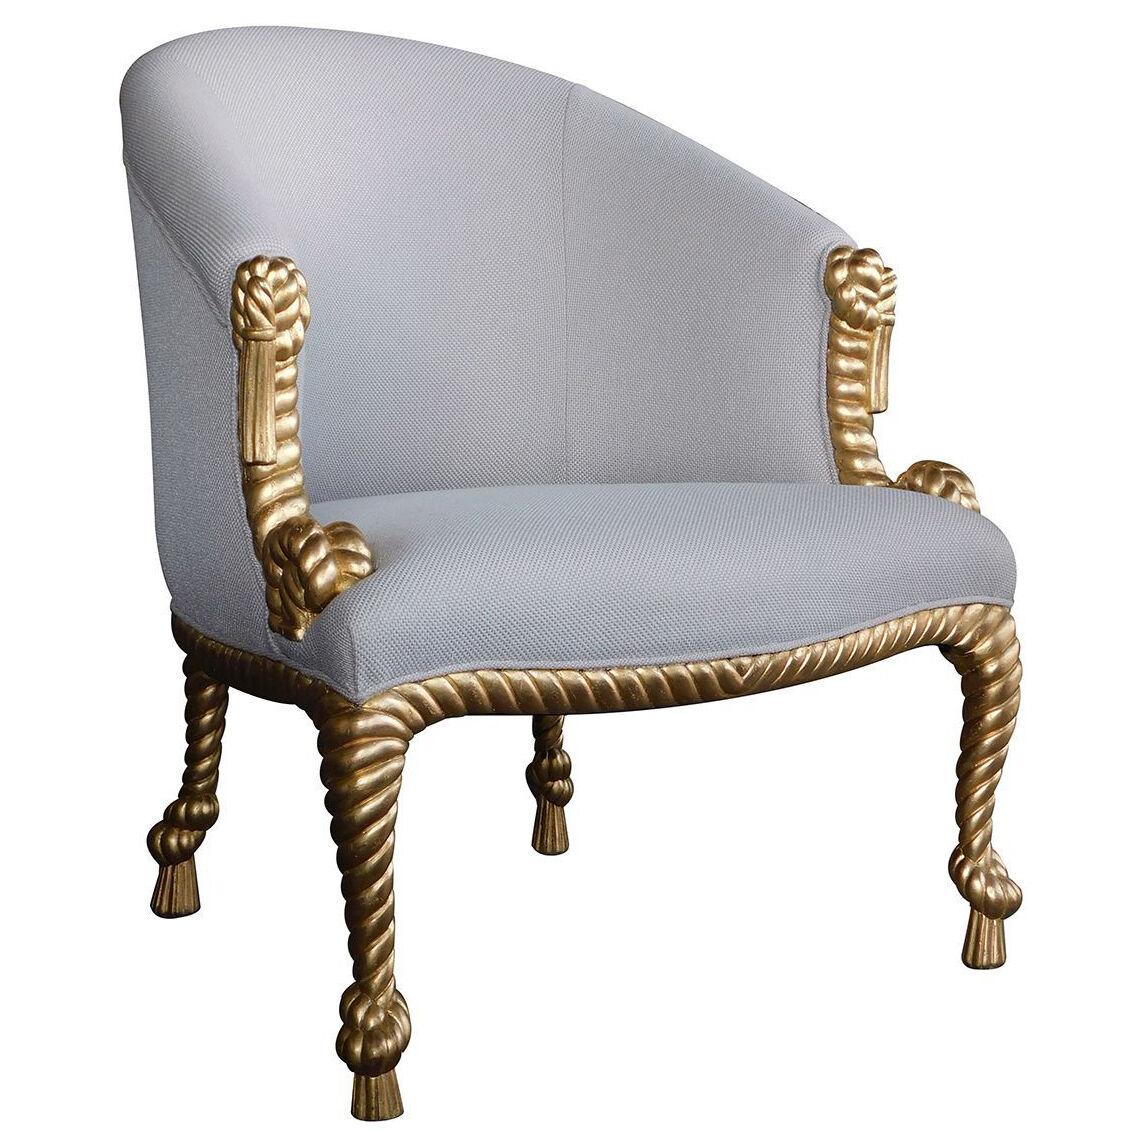 A shapely French Napoleon III style gilt-wood bergere